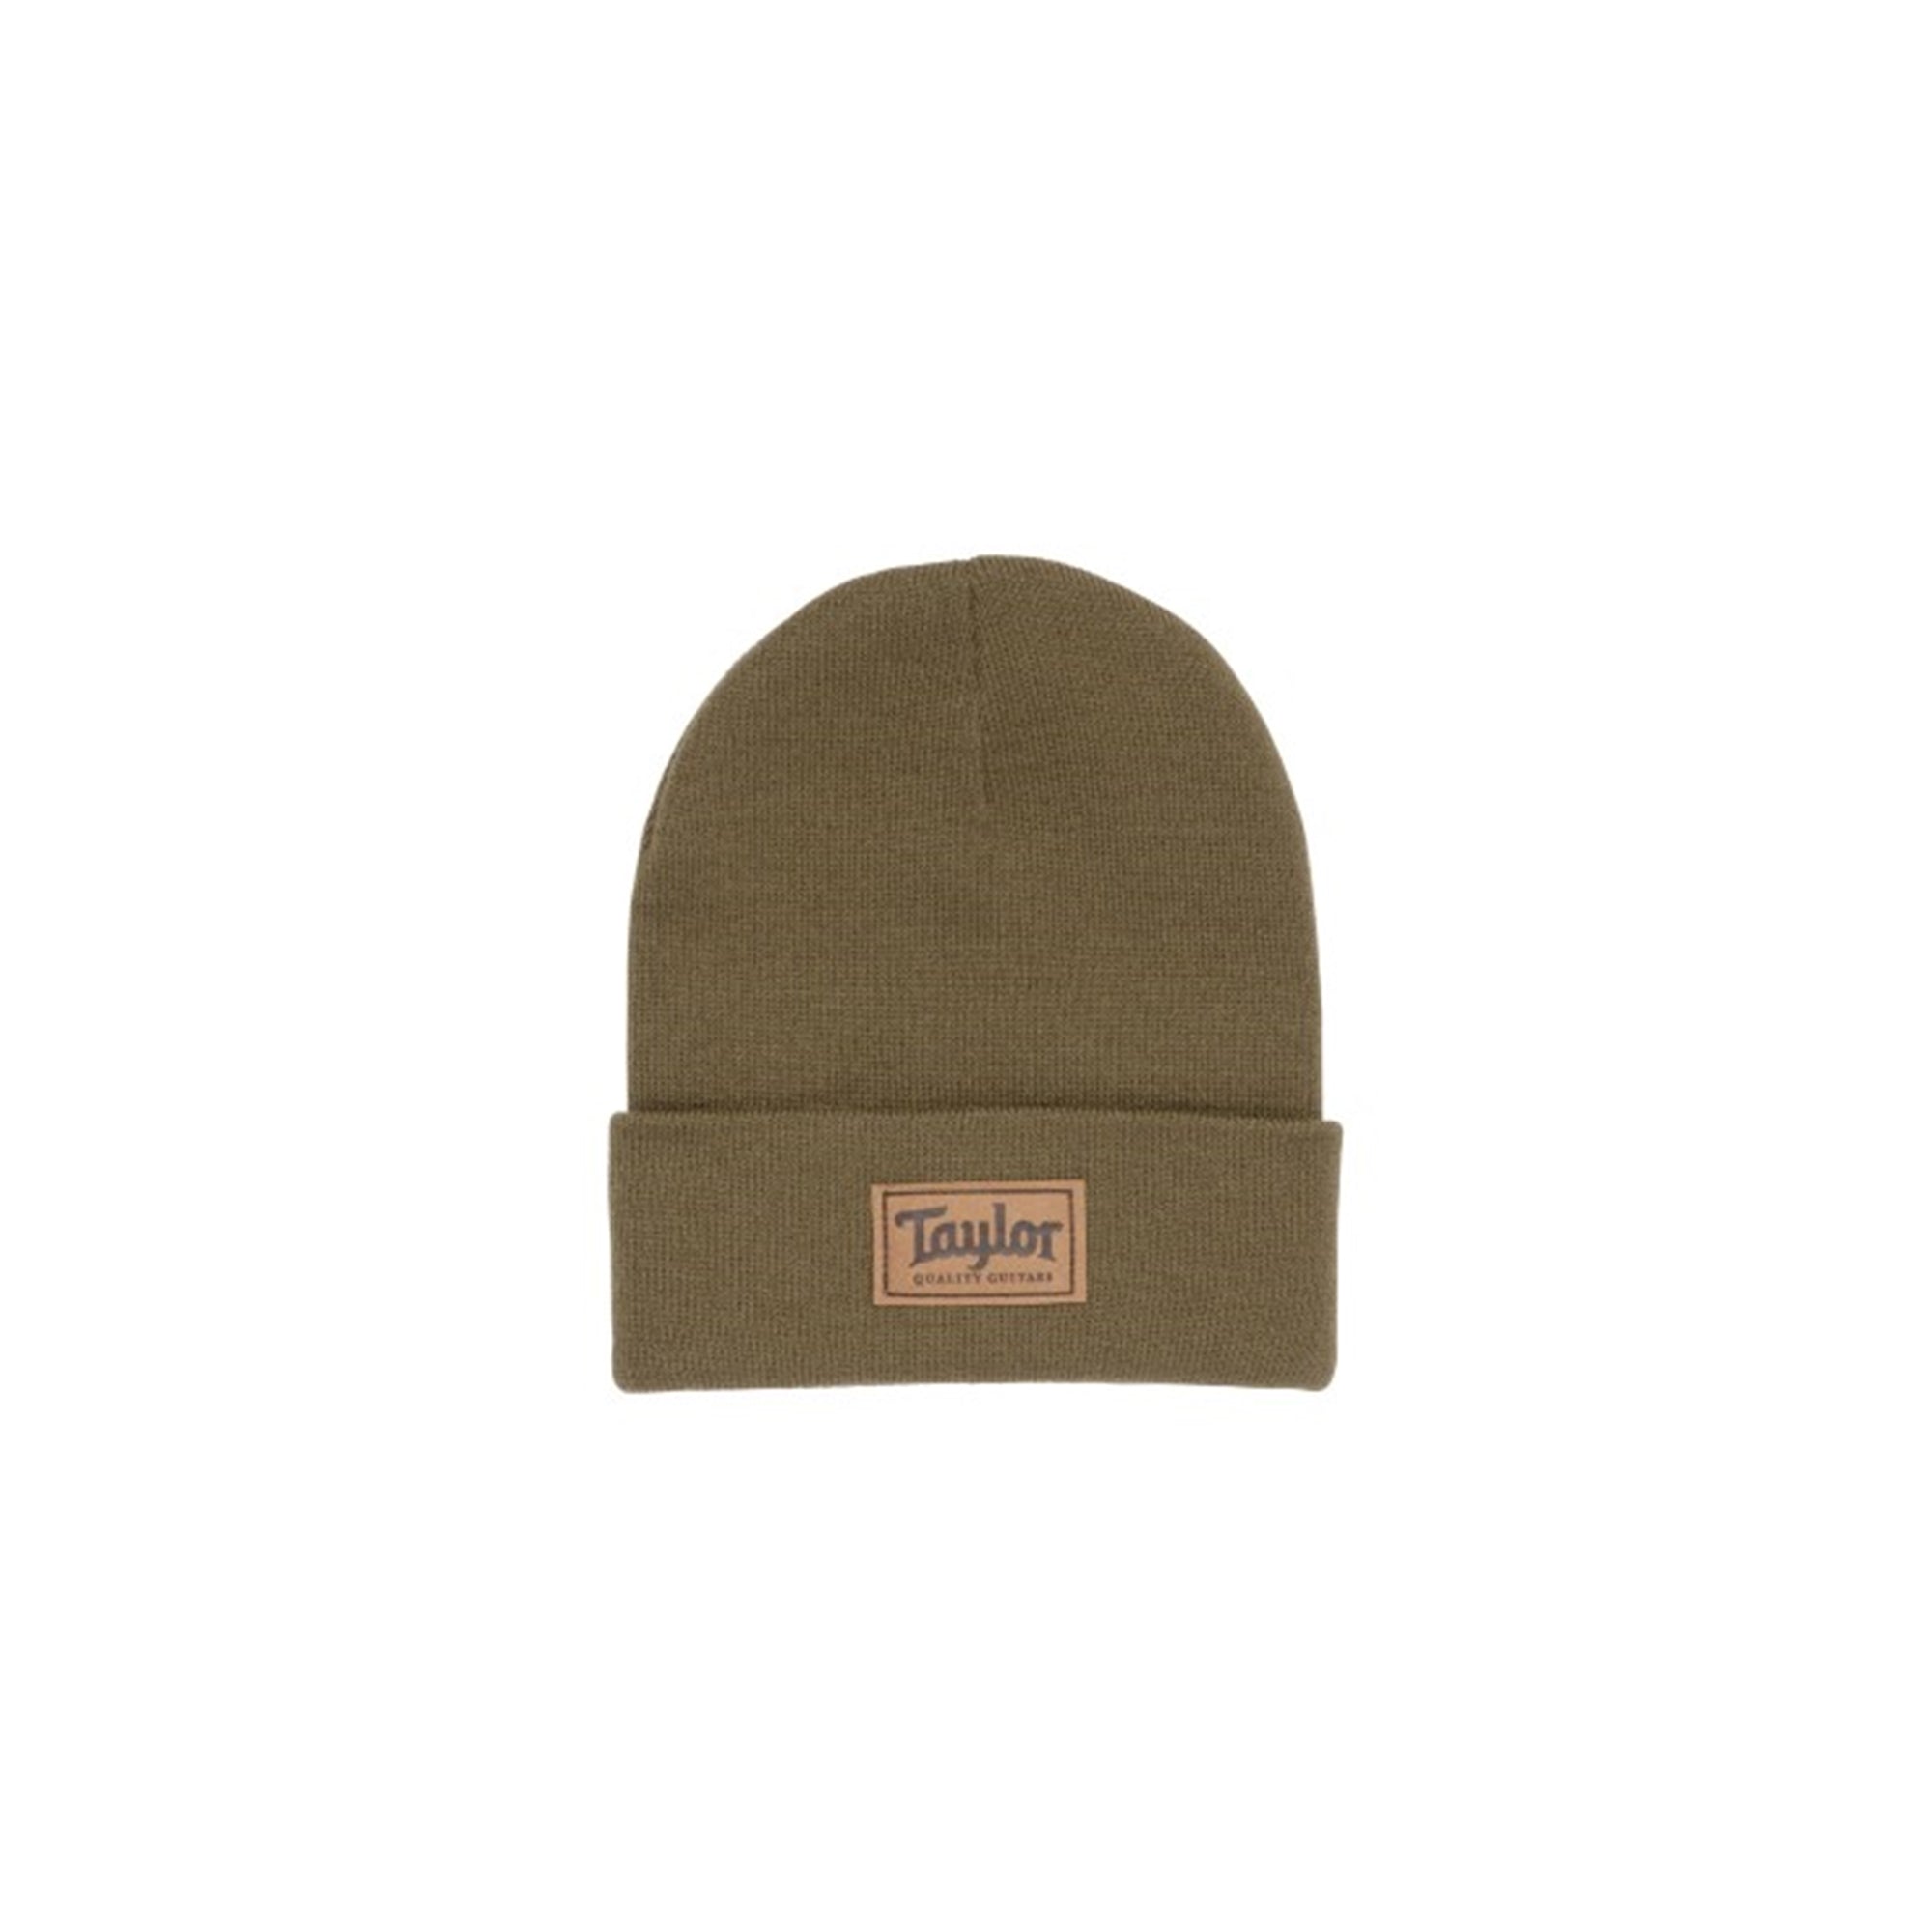 Taylor 3701 Beanie Hat, Olive